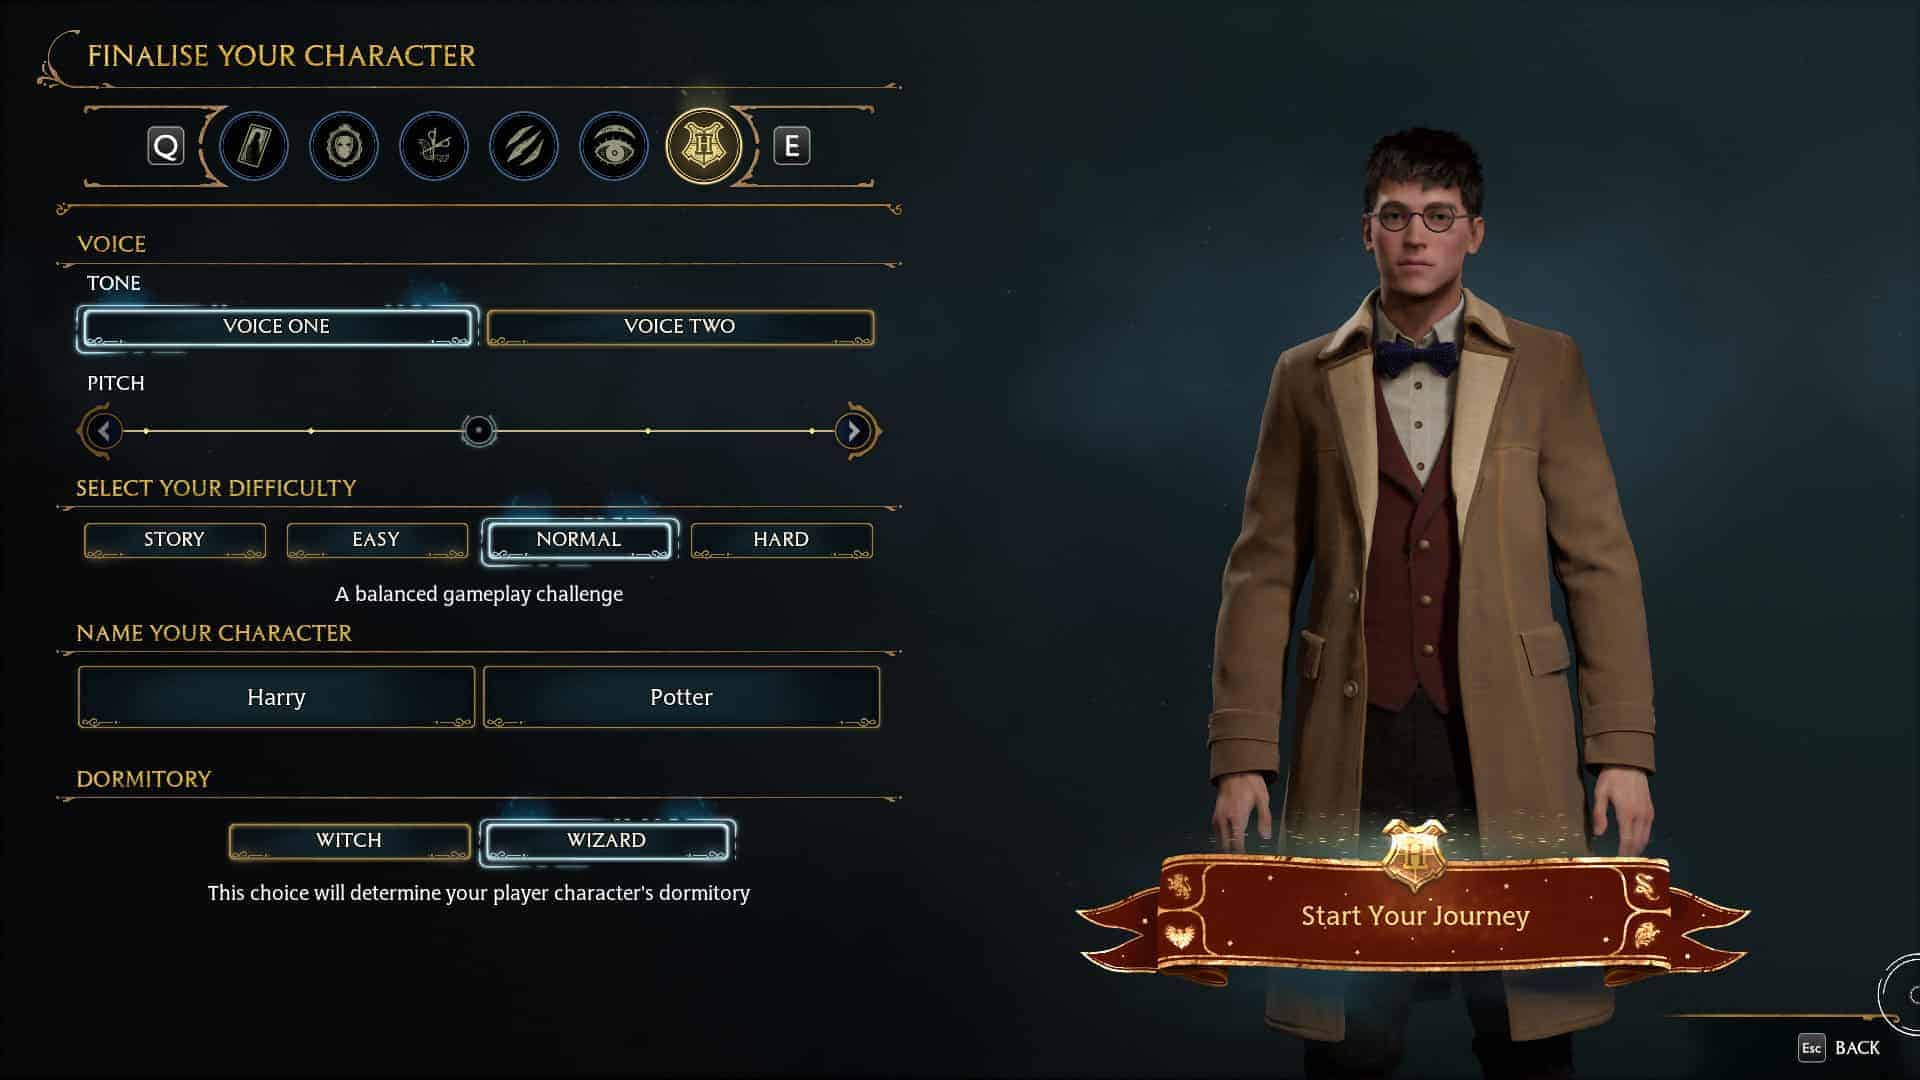 Hogwarts Legacy Twitch content creator tracking website now down